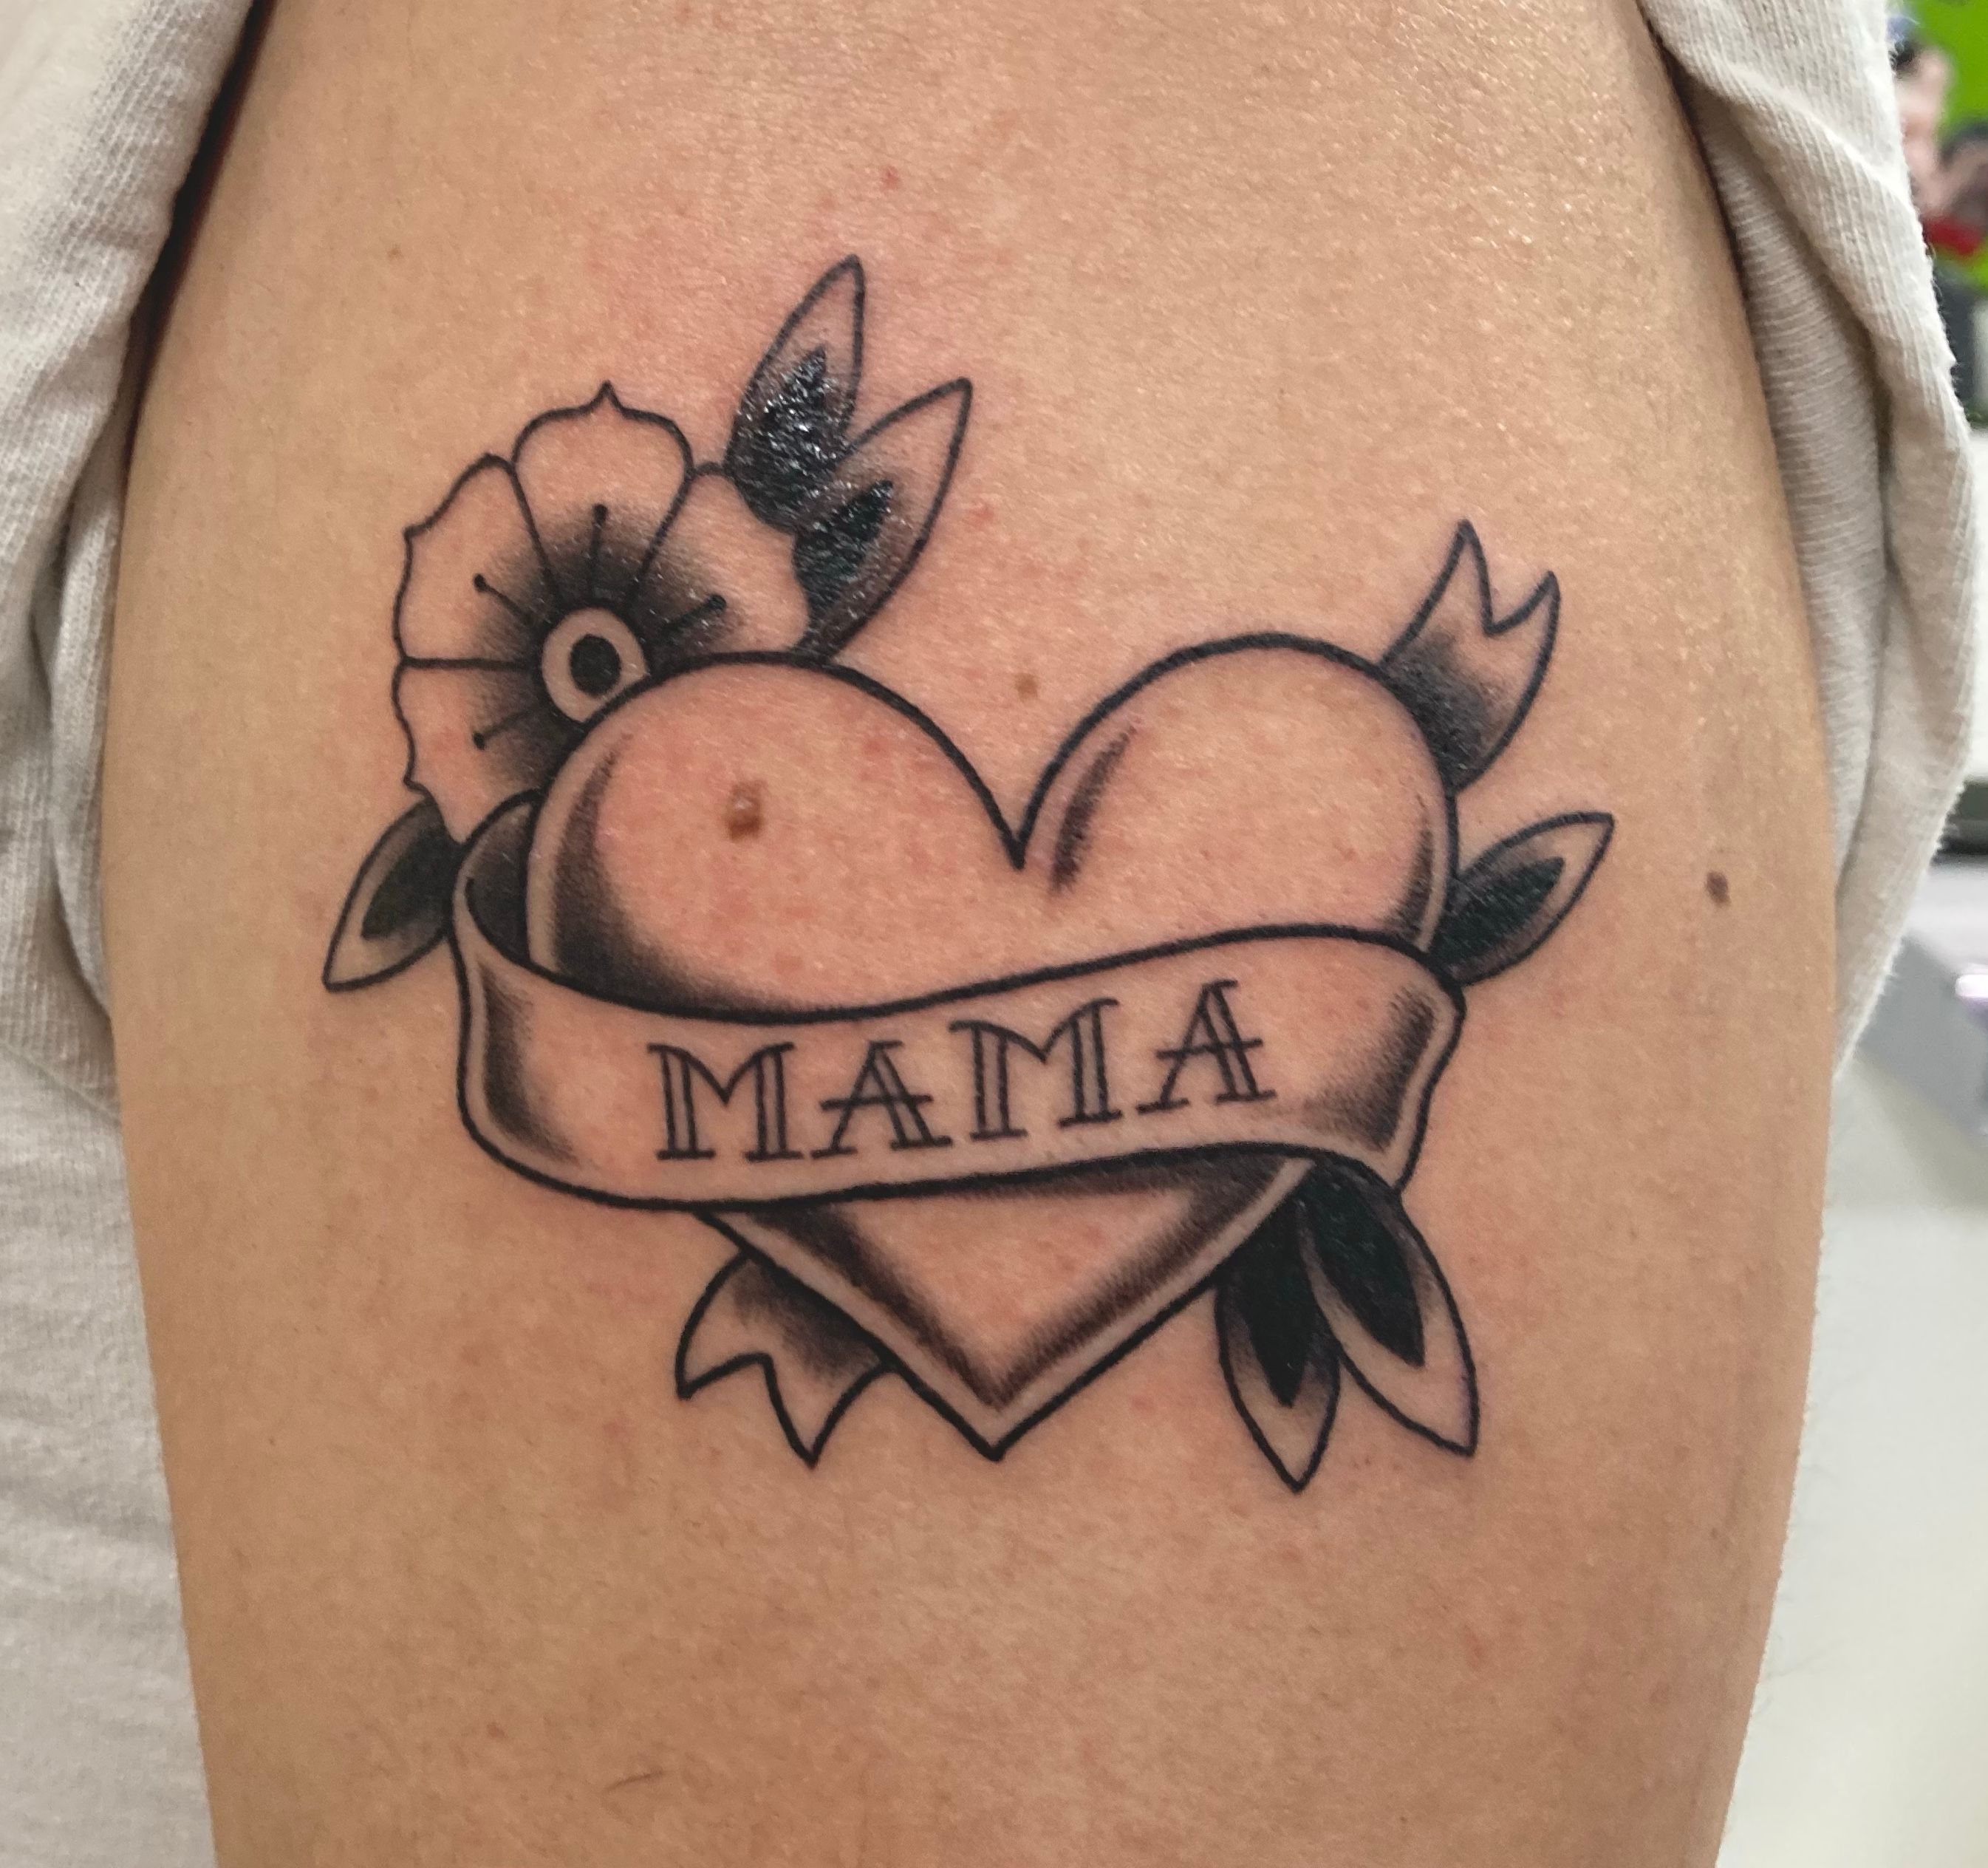 Mama Heart Tattoo Merch & Gifts for Sale | Redbubble